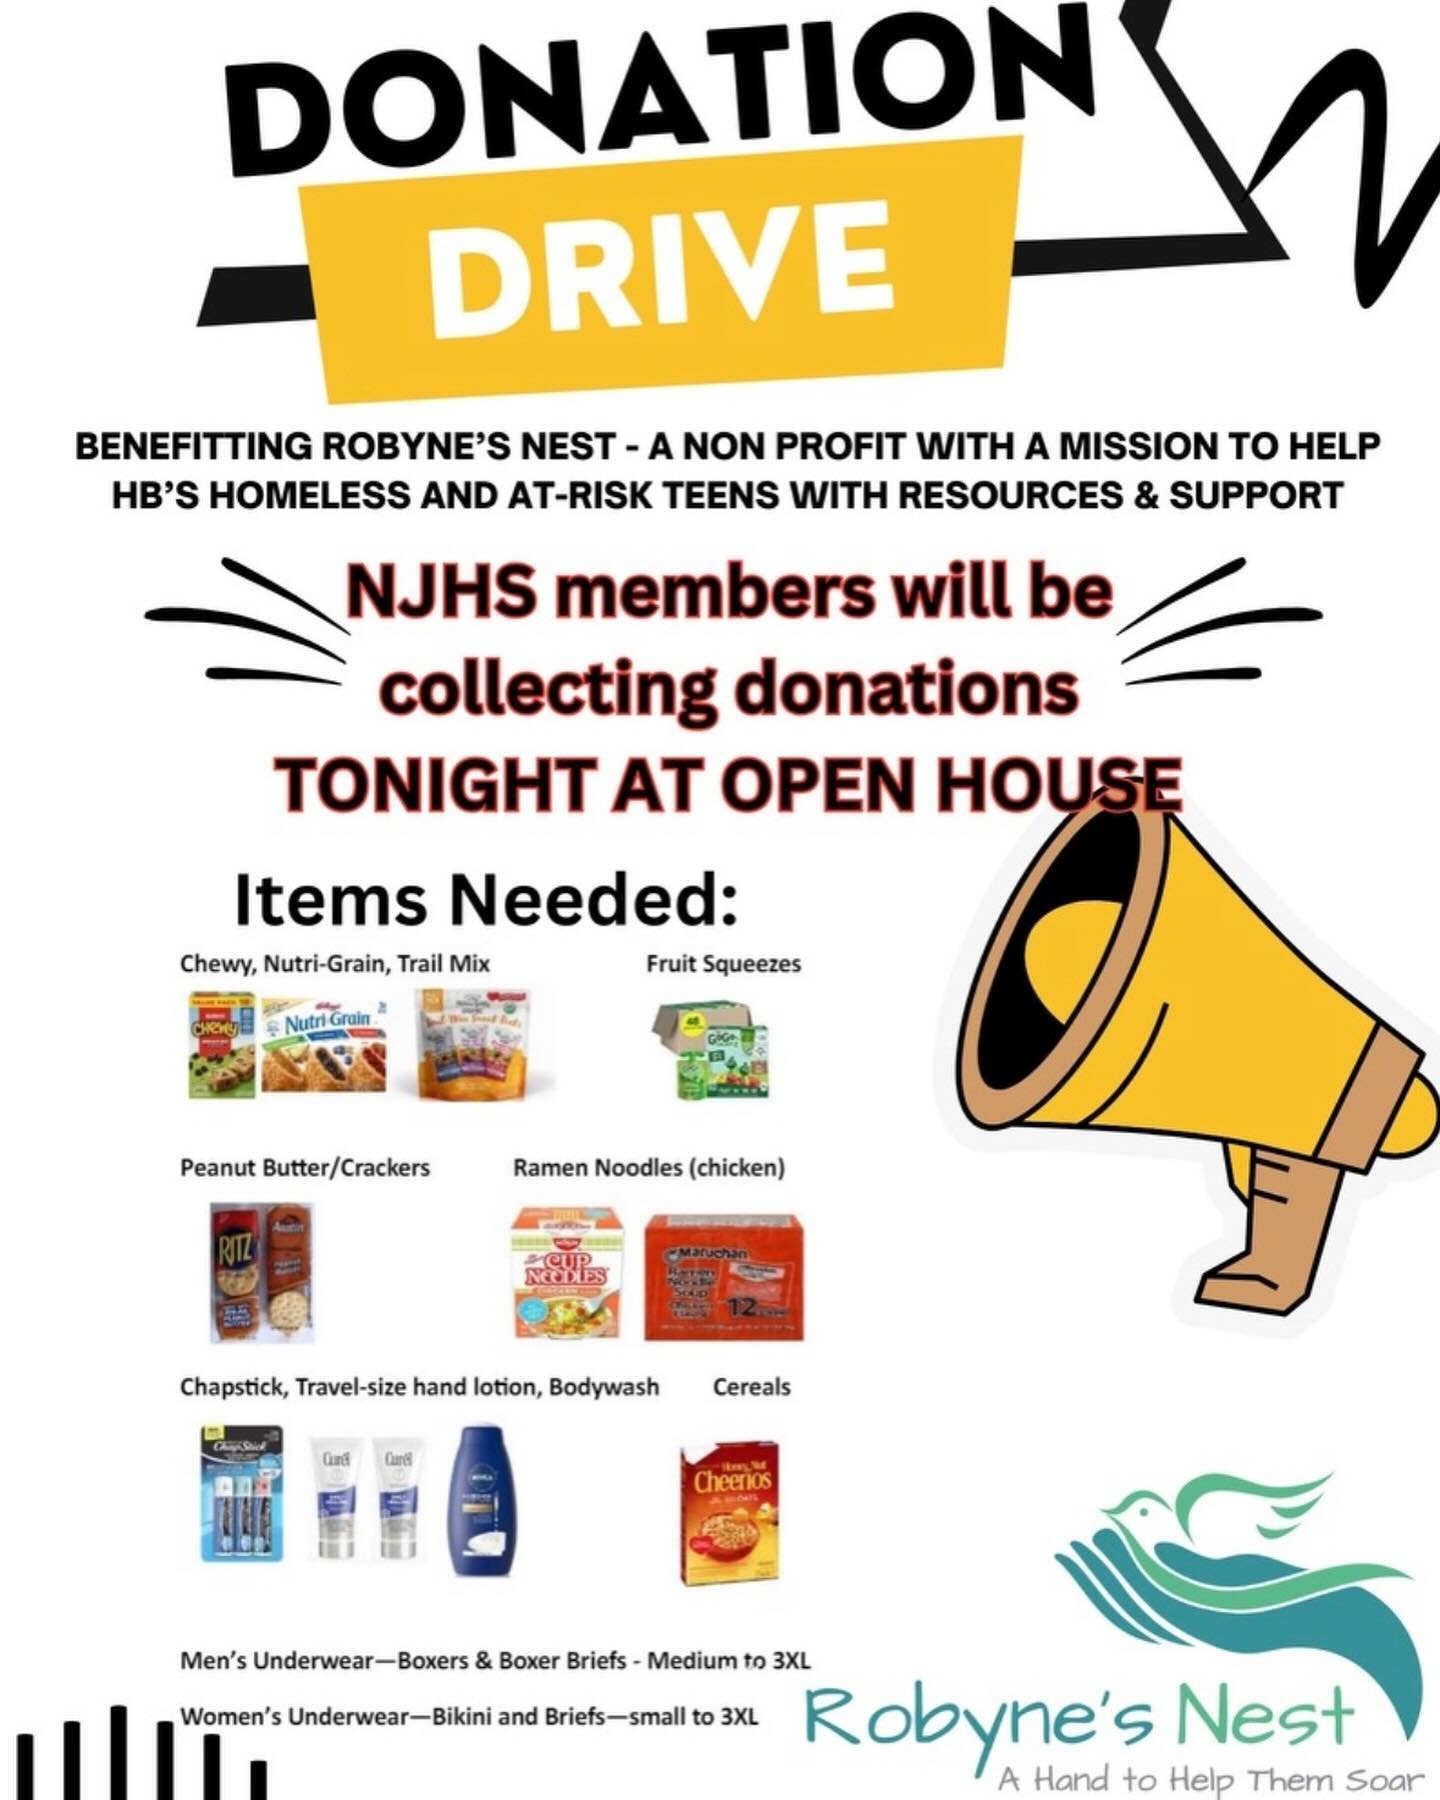 NJHS will be collecting donations at Open House TONIGHT!!